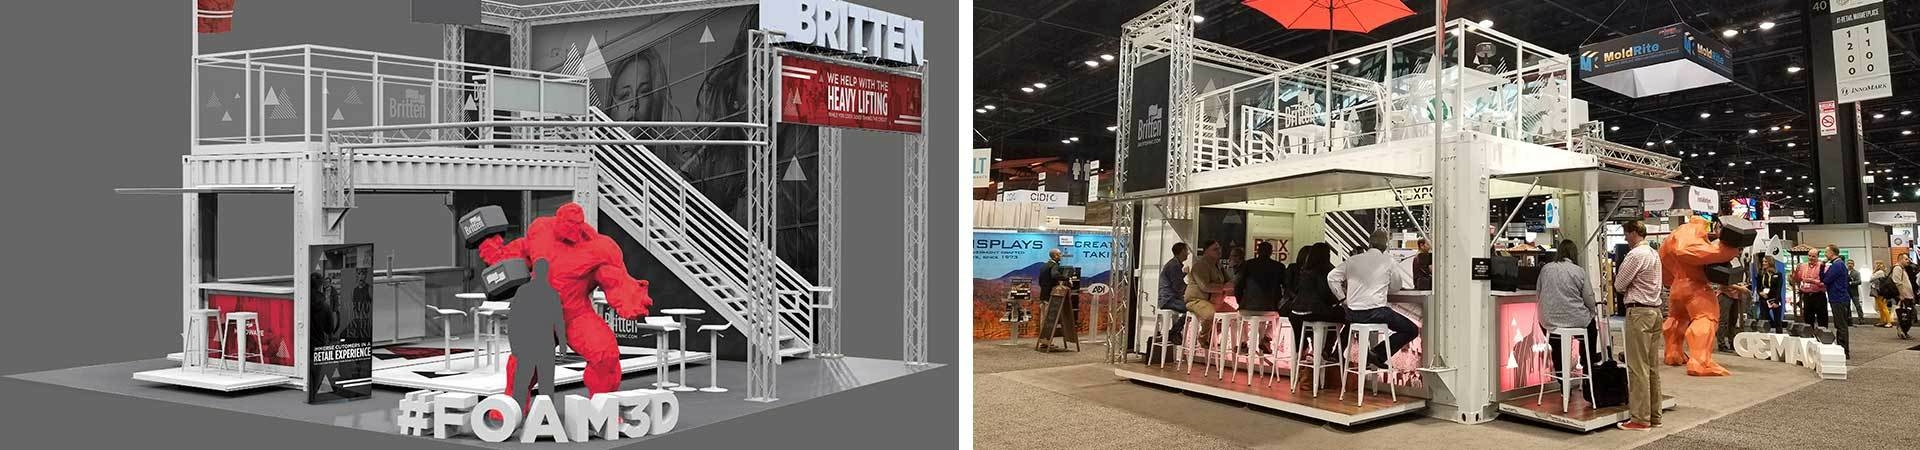 Custom box pop shipping containers as tradeshow booths at an expo.